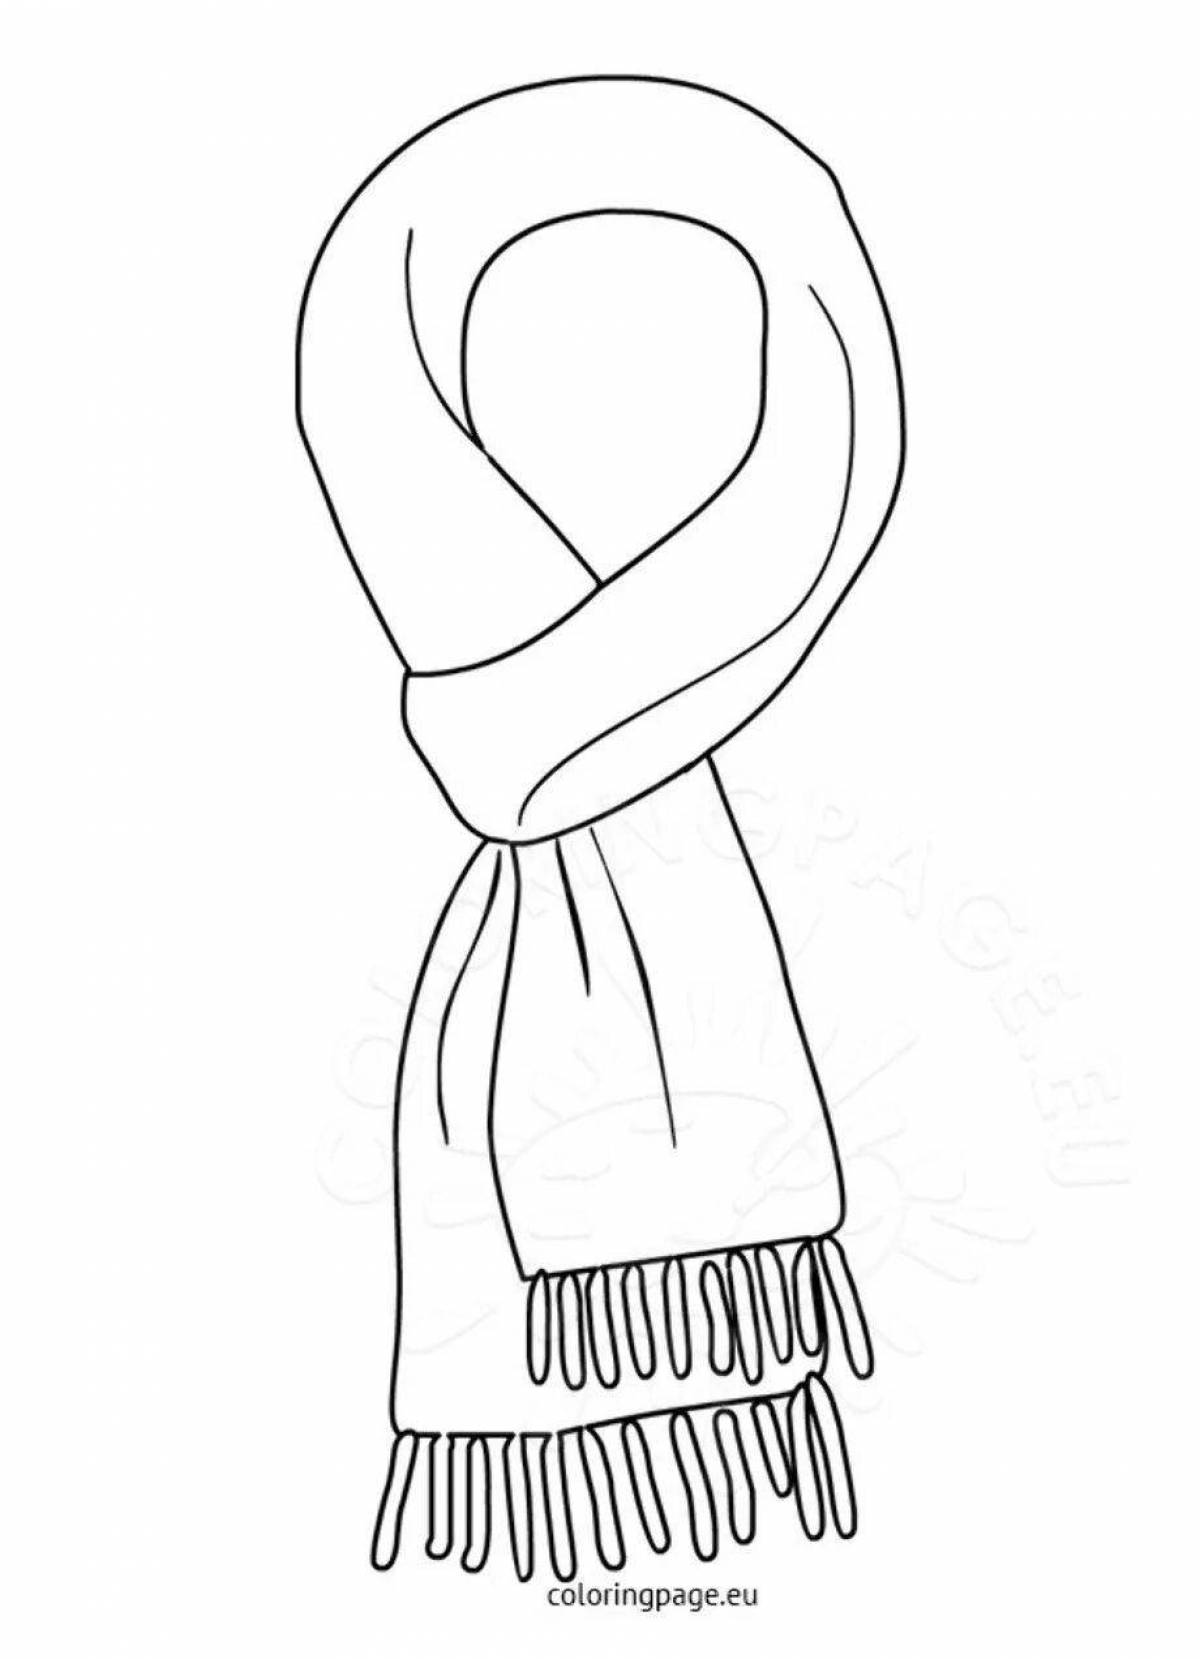 Playful scarf coloring page for kids